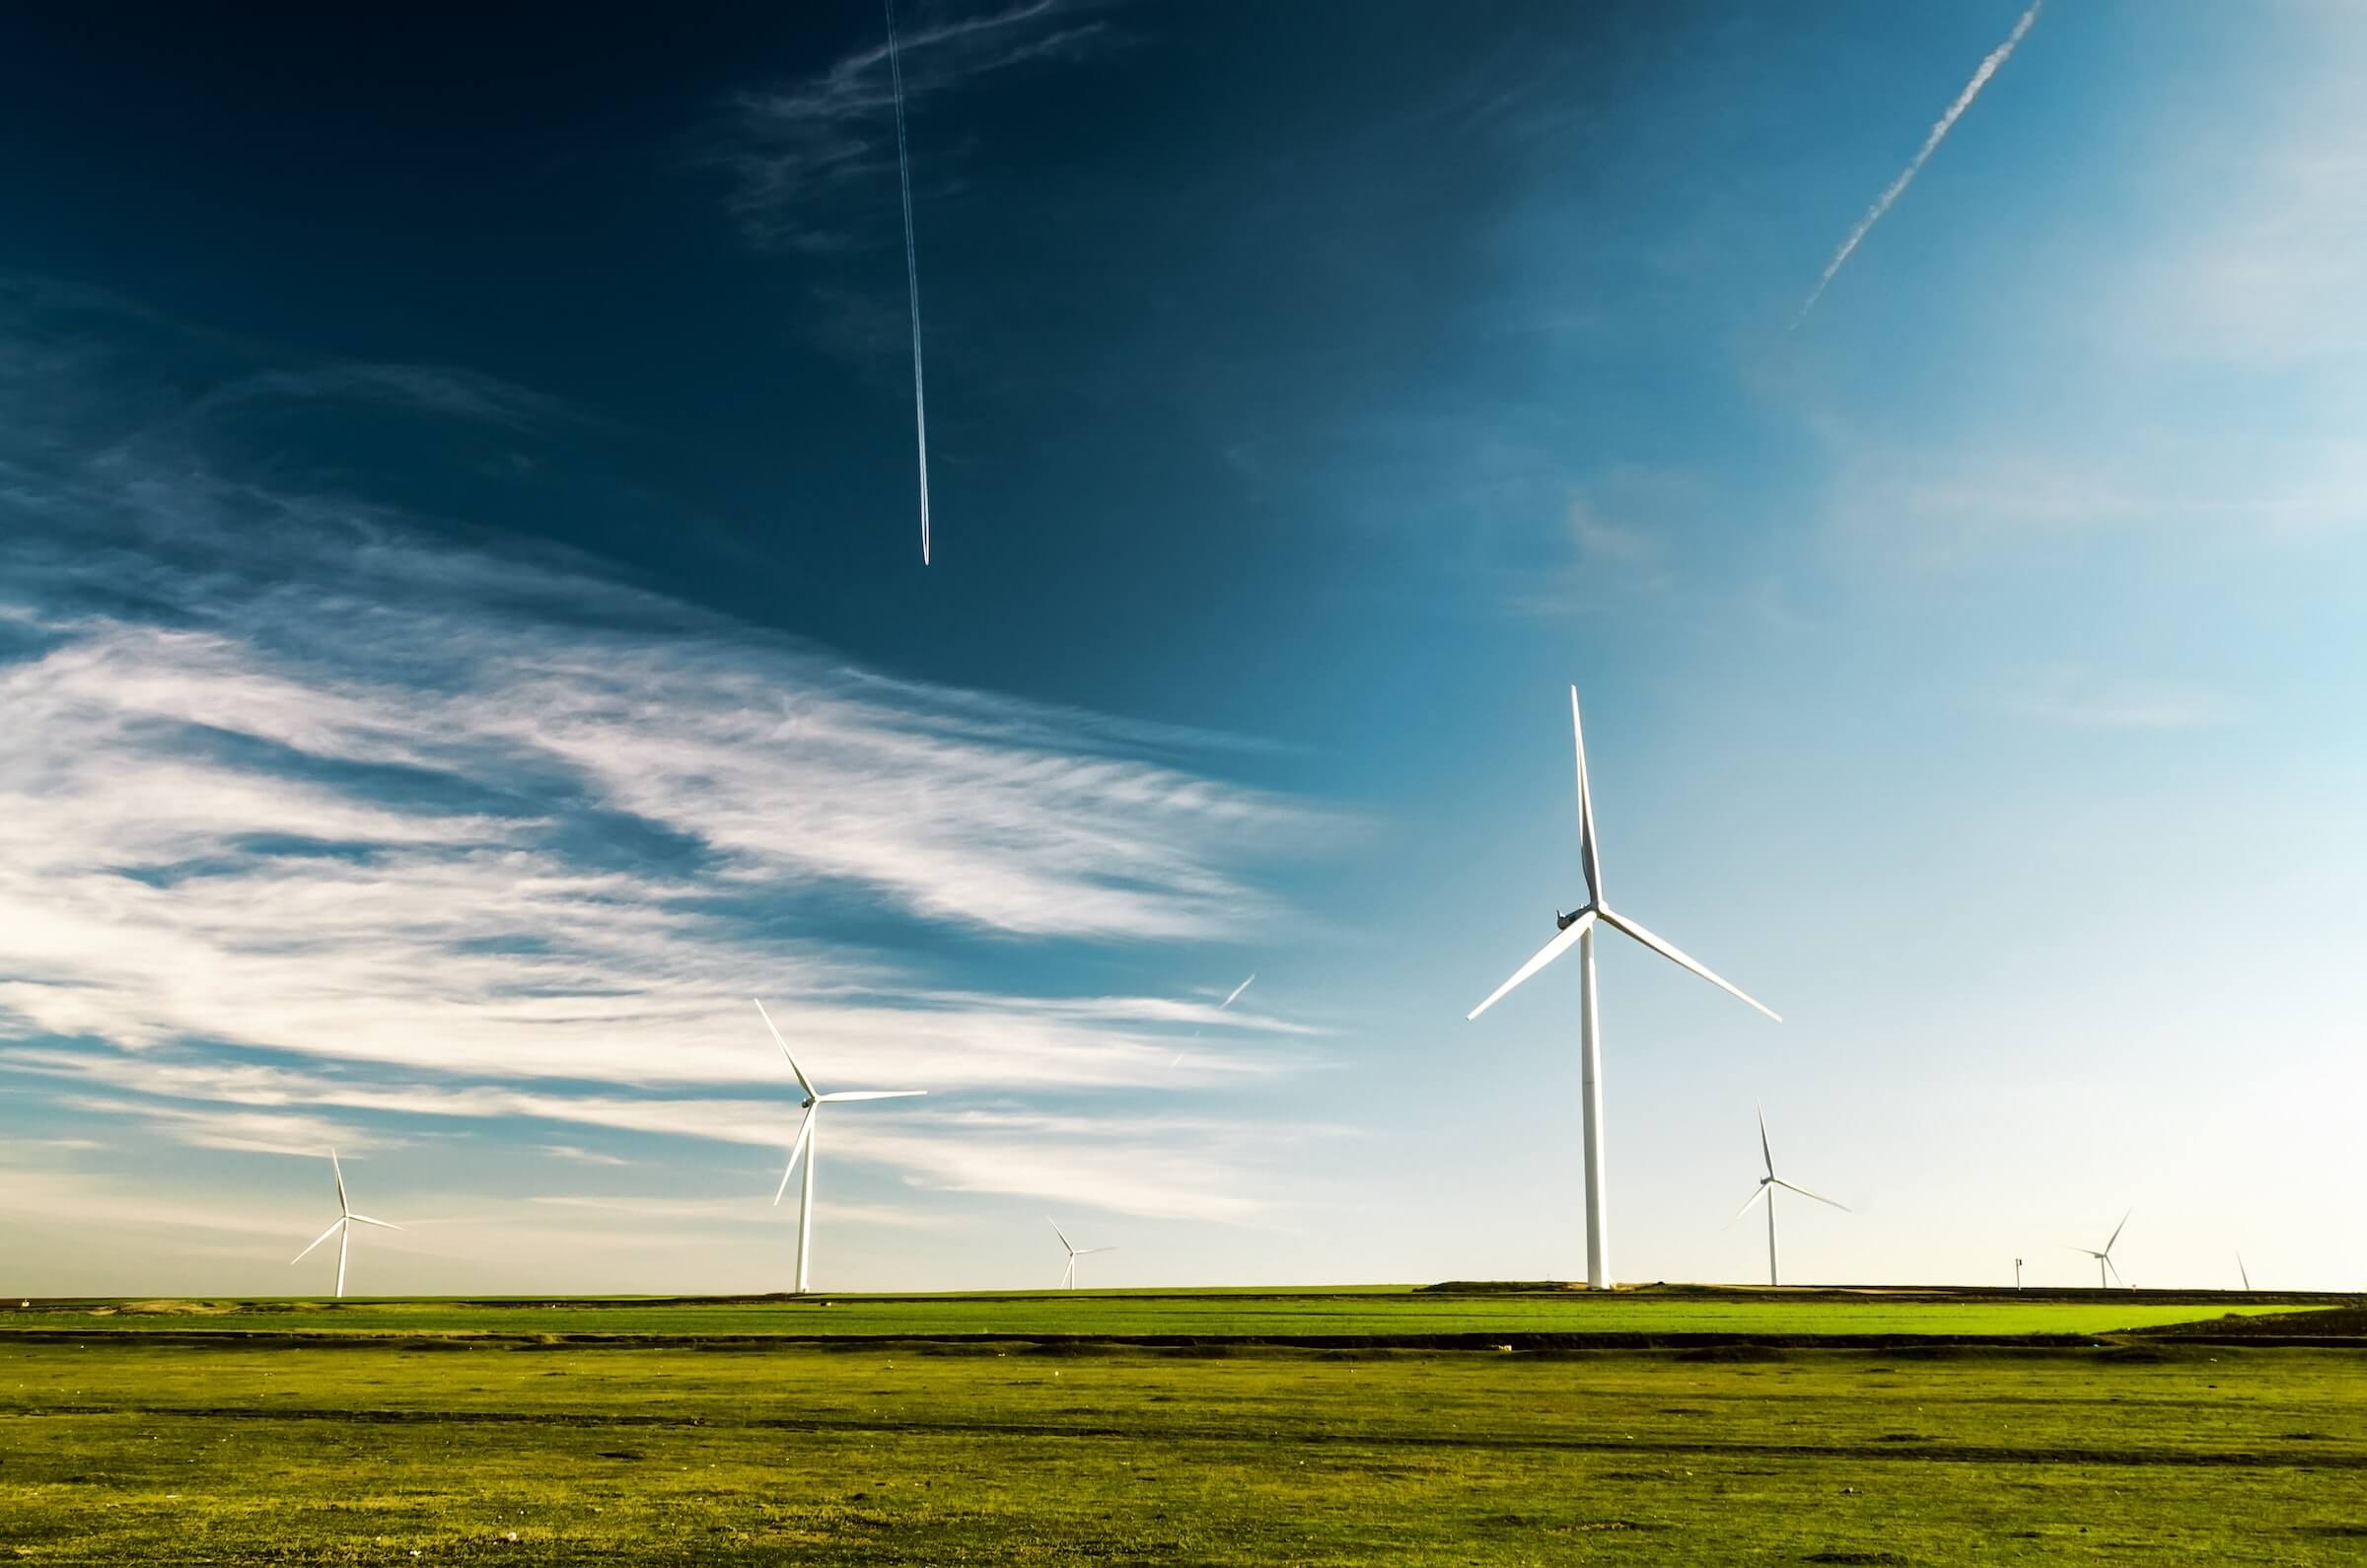 EIA: U.S. Market Sees 13 Percent Increase in Wind Production in 2020